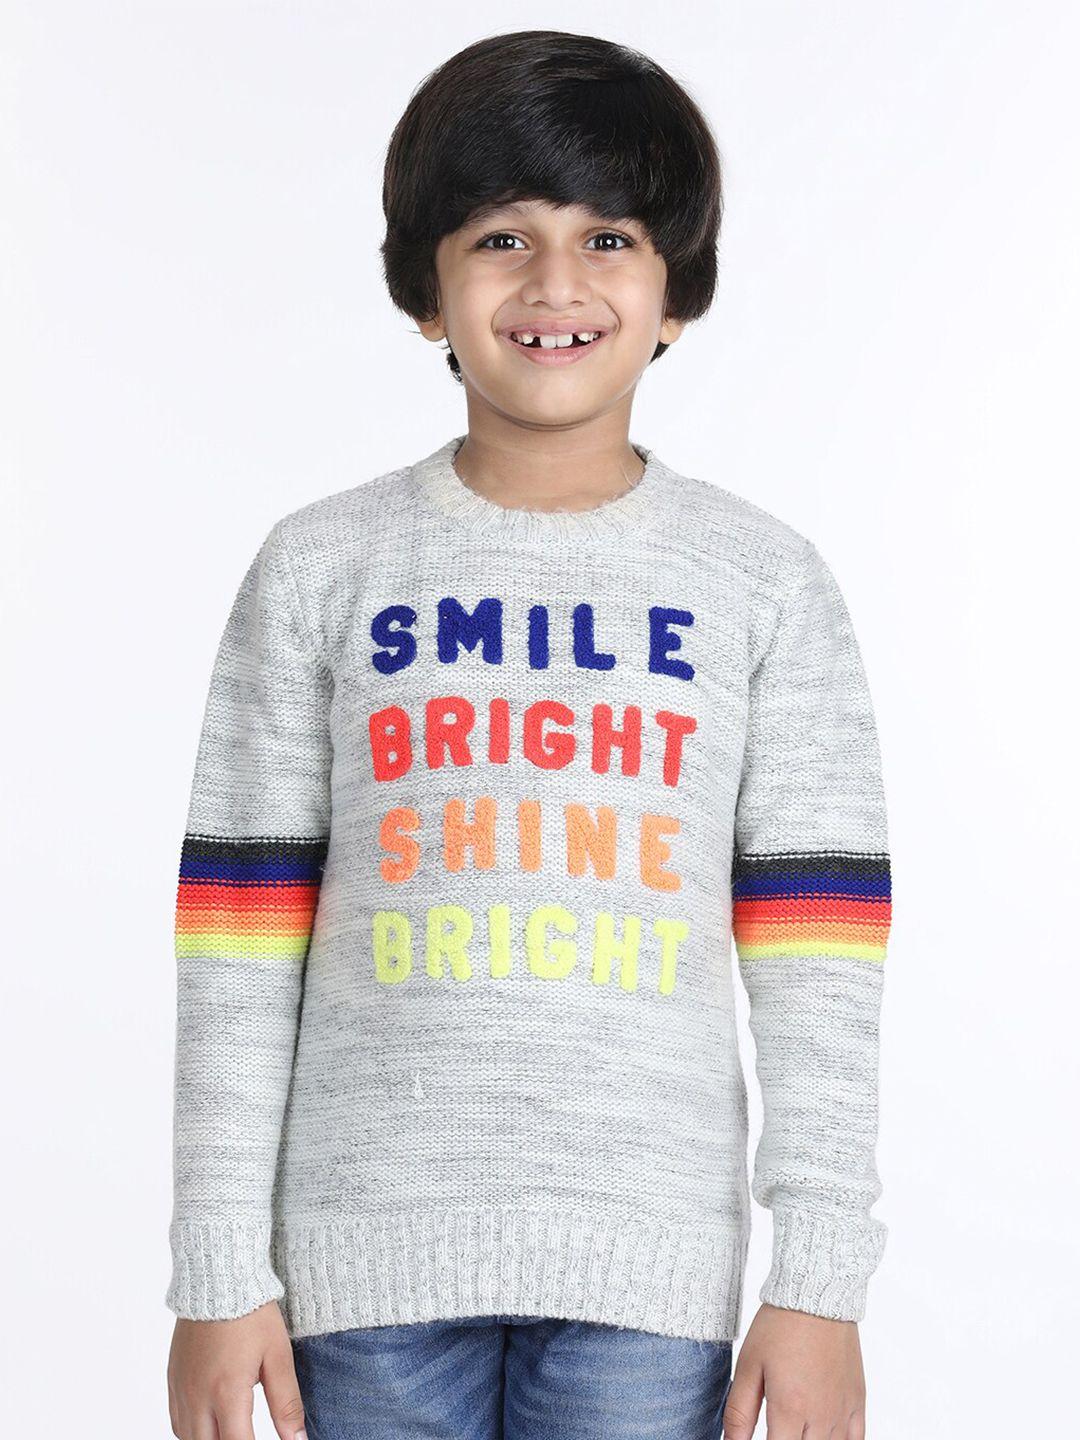 wingsfield-boys-typography-printed-pullover-sweater